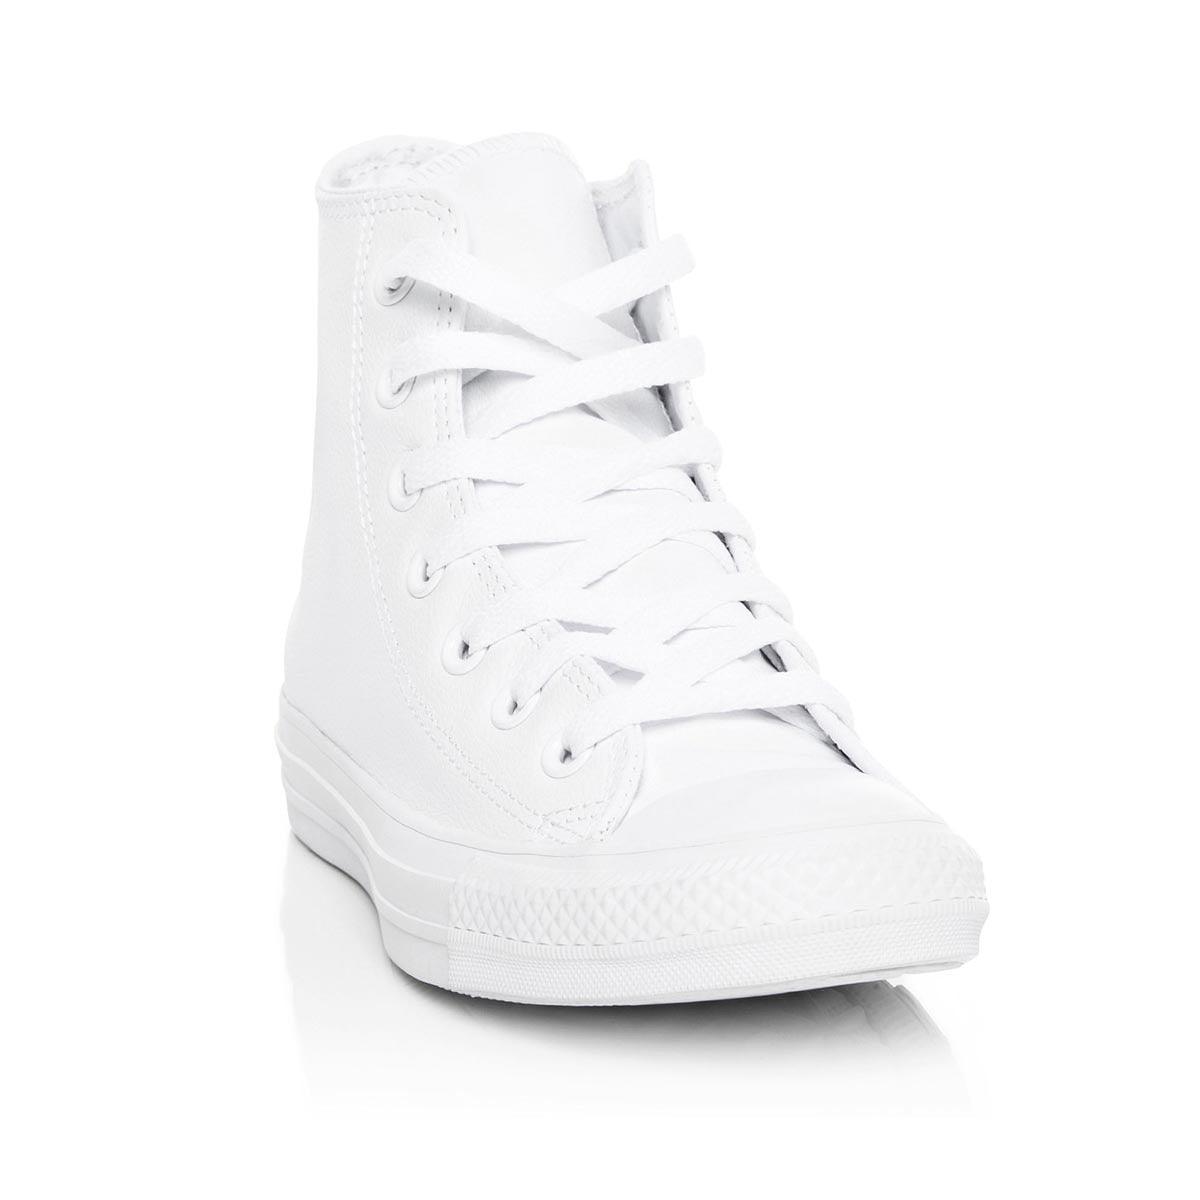 Converse Chuck Taylor All Star High Leather - The Next Pair